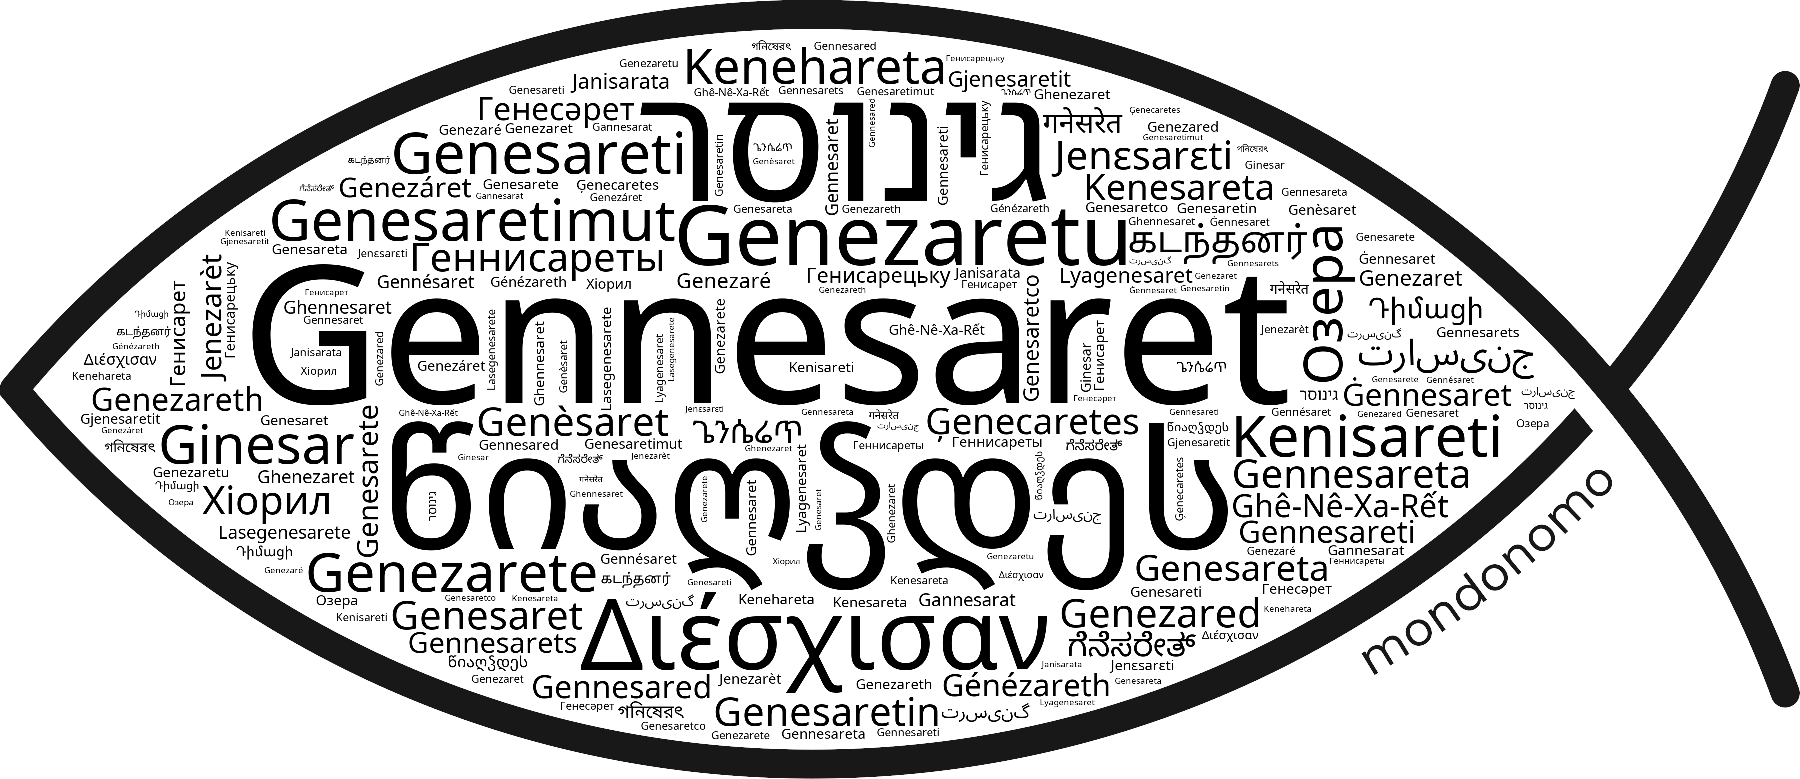 Name Gennesaret in the world's Bibles